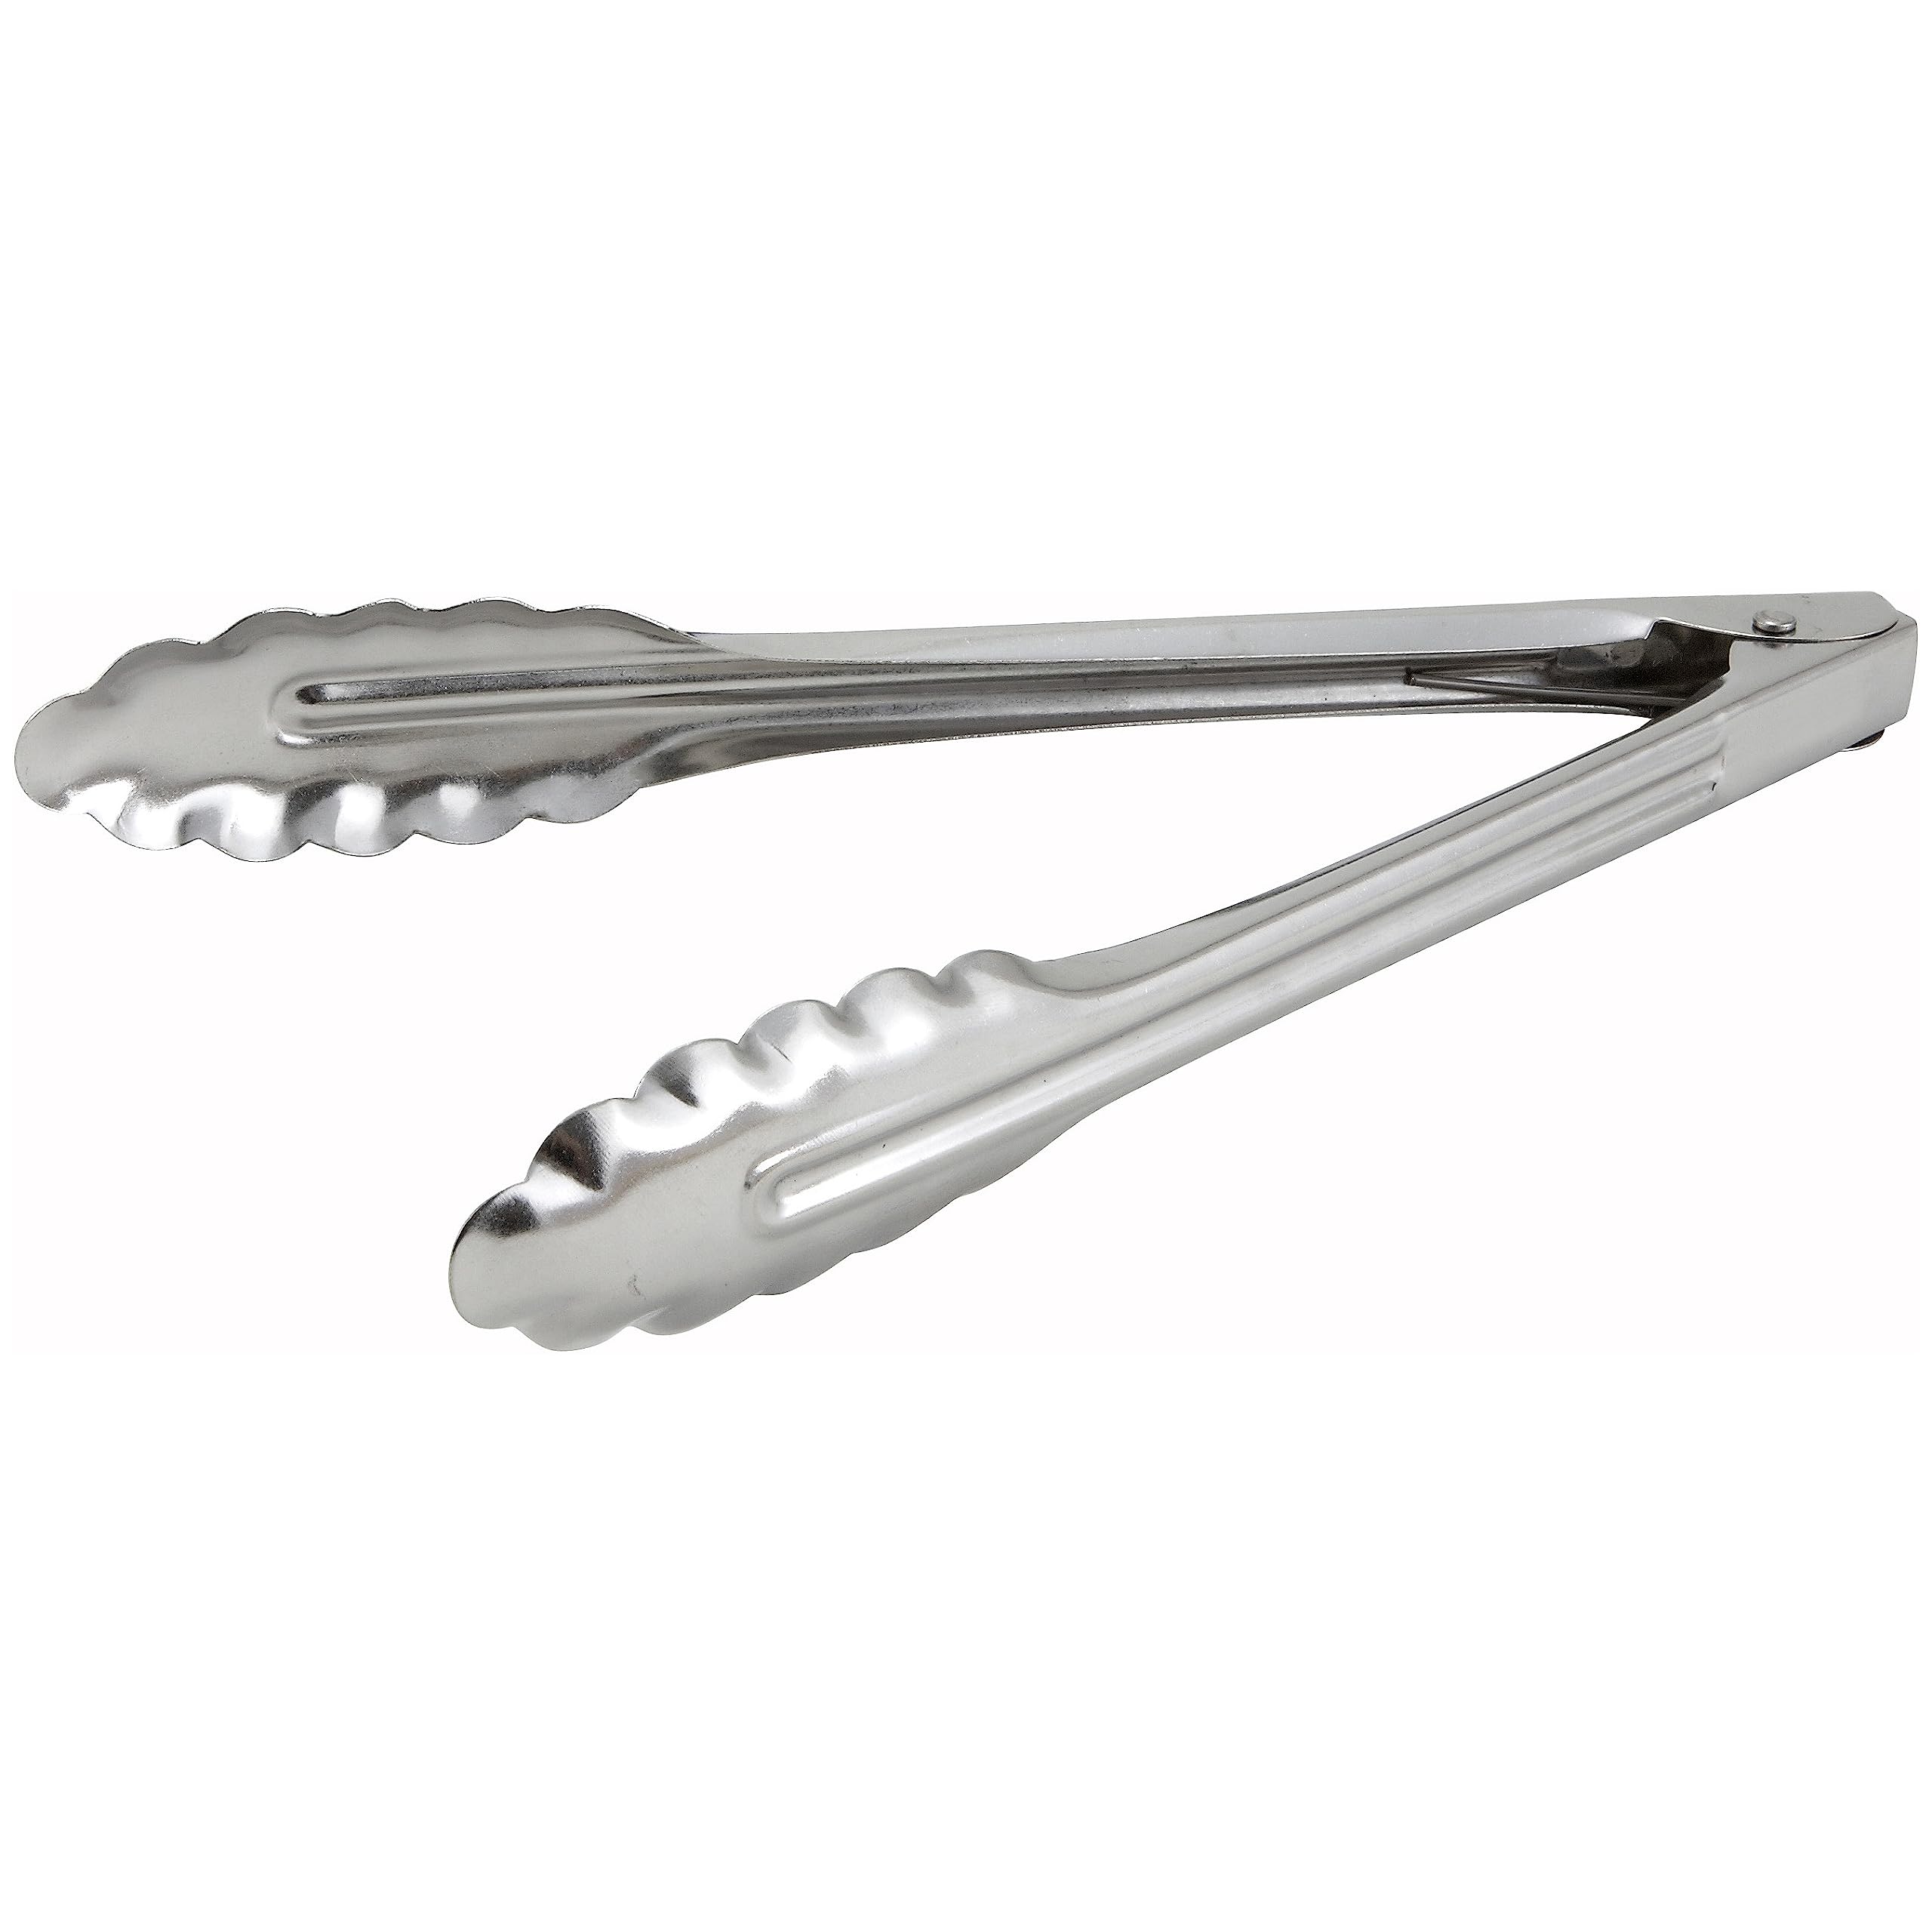 9" Winco Coiled Spring Medium Weight Stainless Steel Utility Tong $2 + Free Shipping w/ Prime or on orders over $35